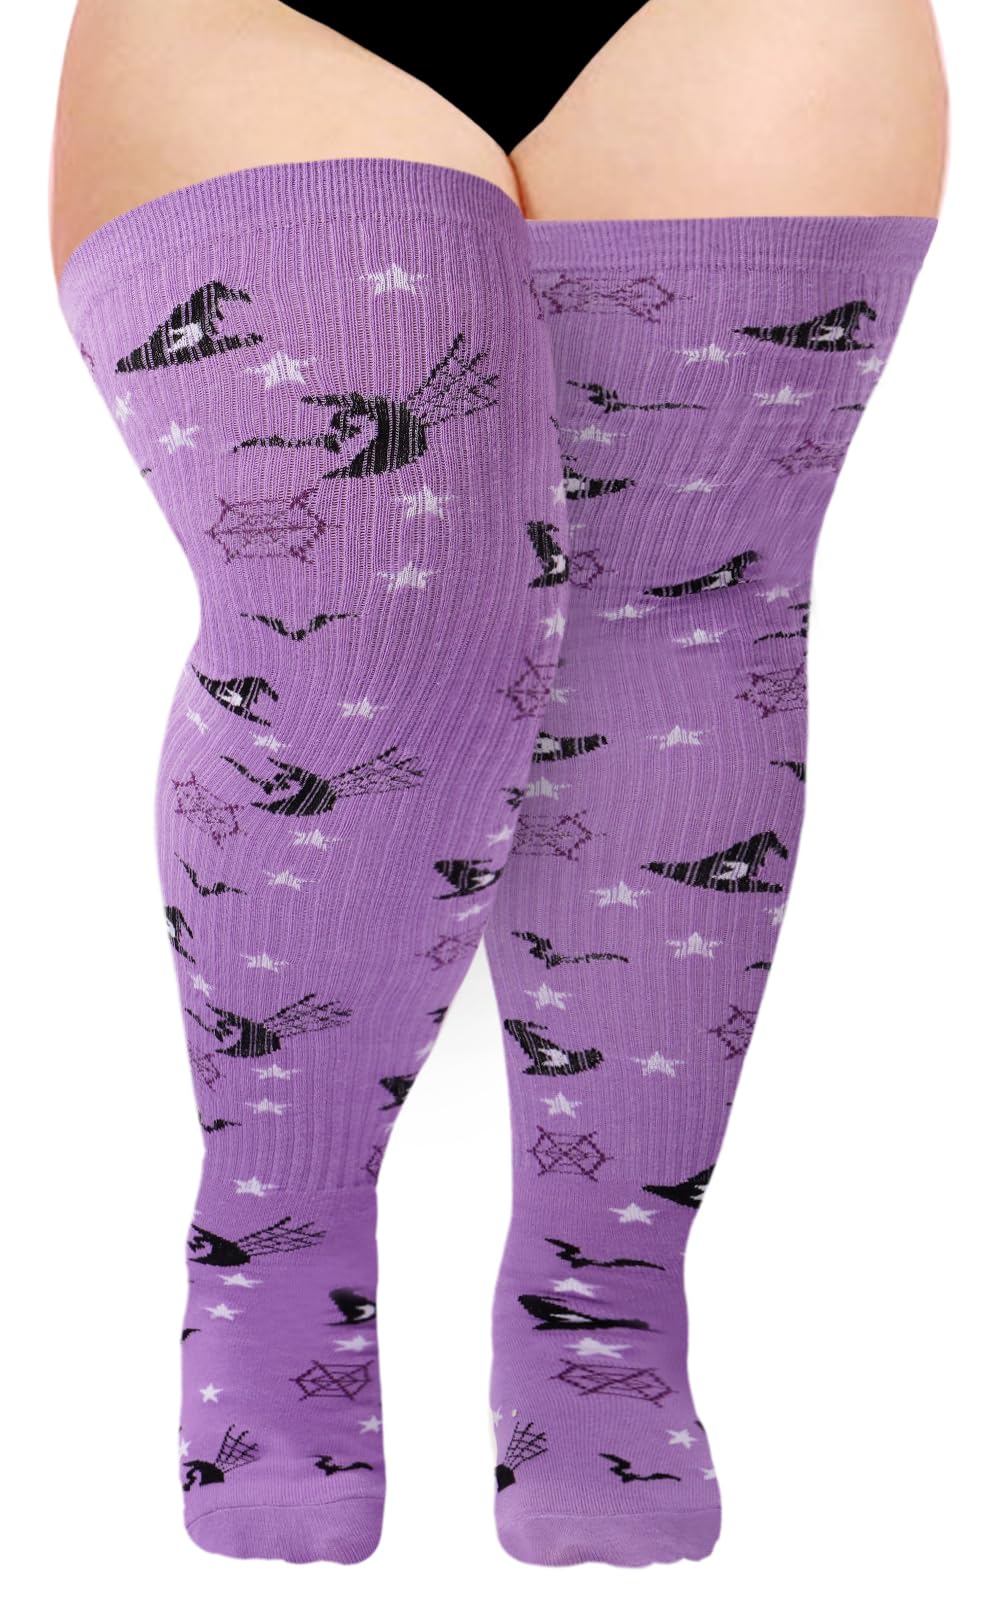 Womens Knit Cotton Extra Long Over the Knee High Socks-Purple & Black